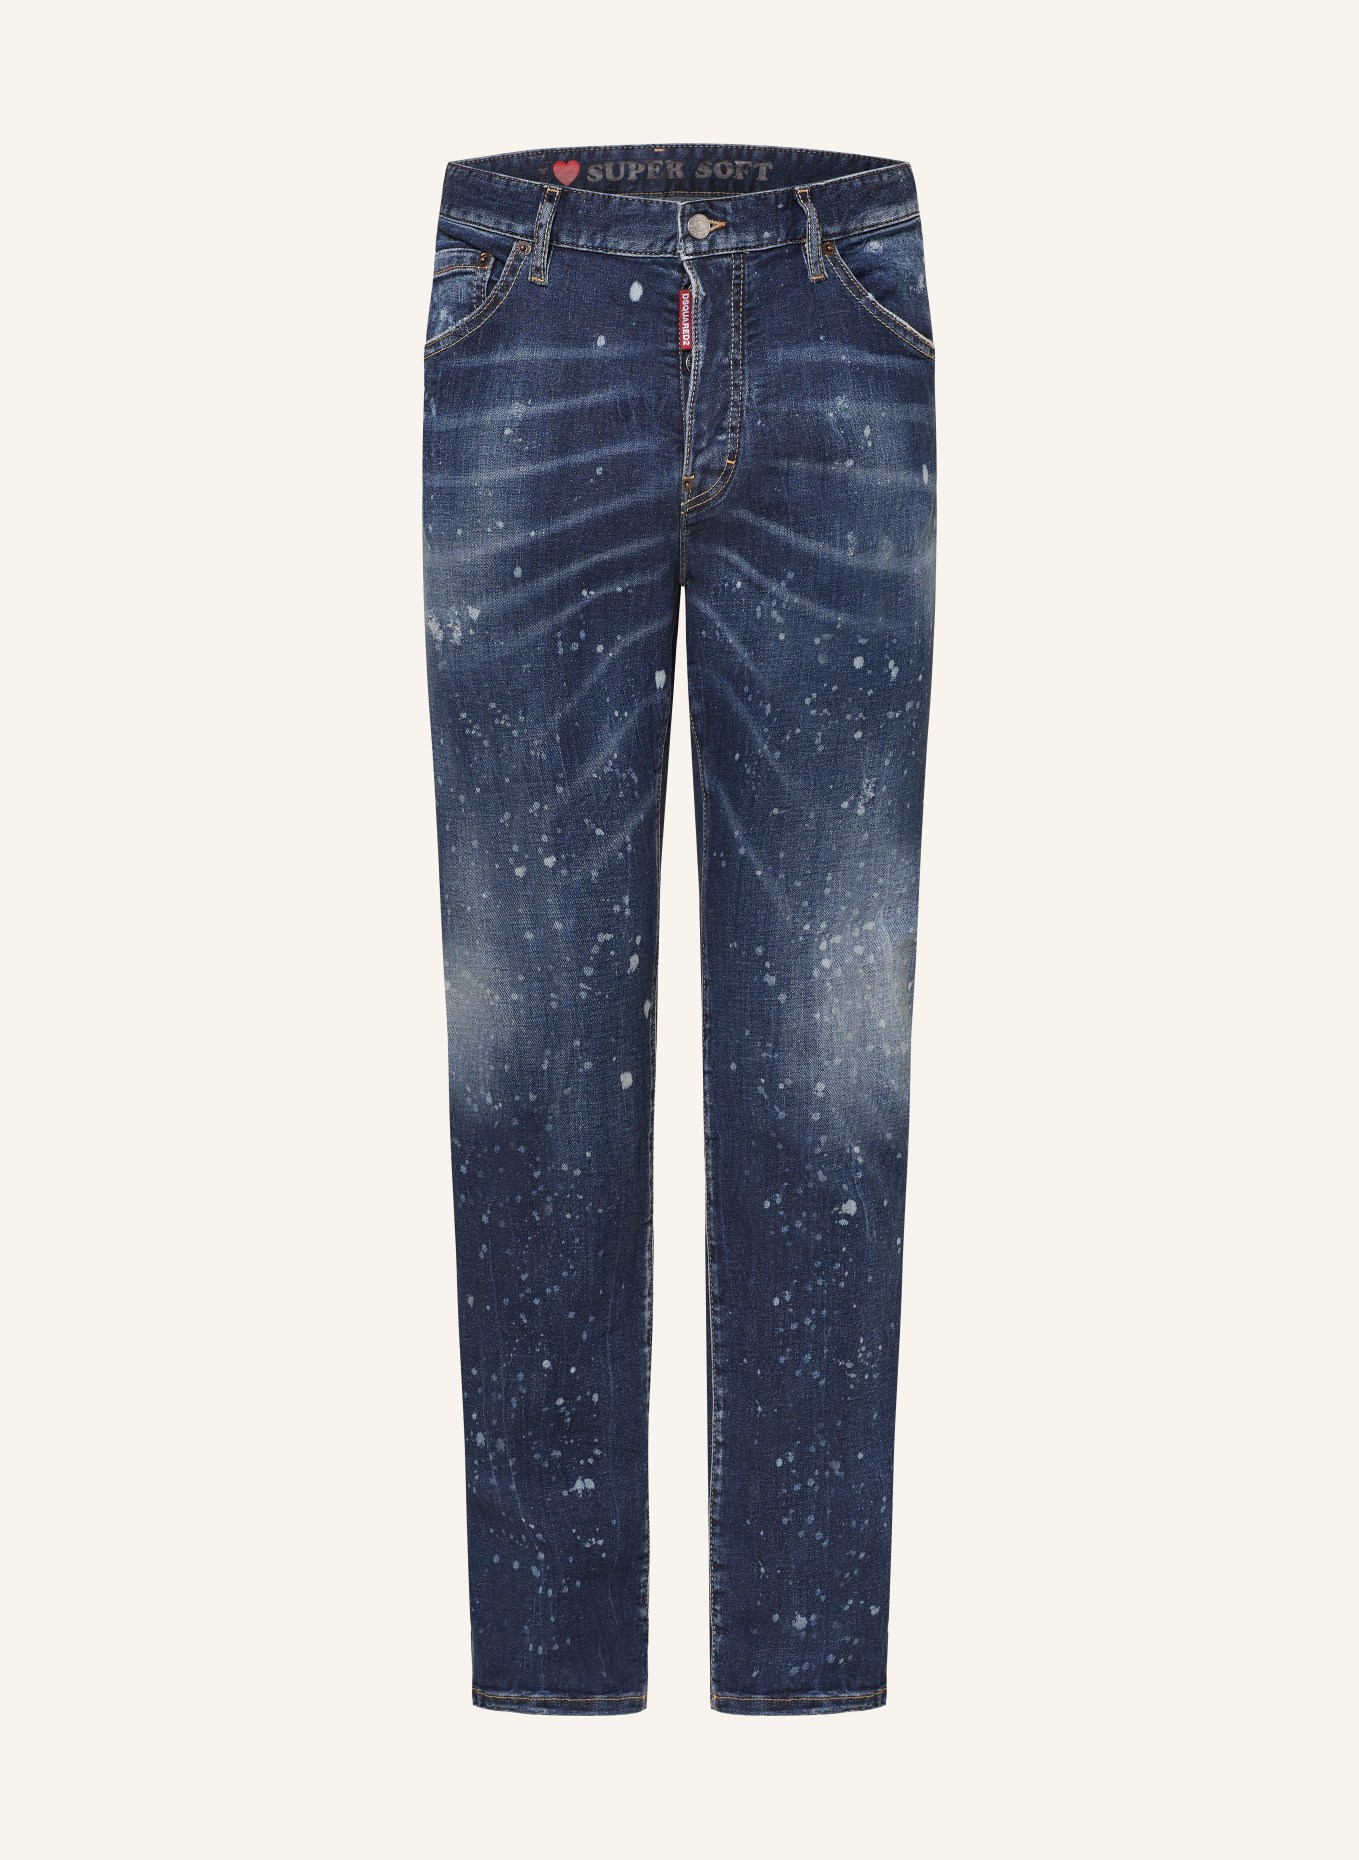 DSQUARED2 Destroyed Jeans COOL GUY Slim Fit, Farbe: 470 BLUE NAVY (Bild 1)